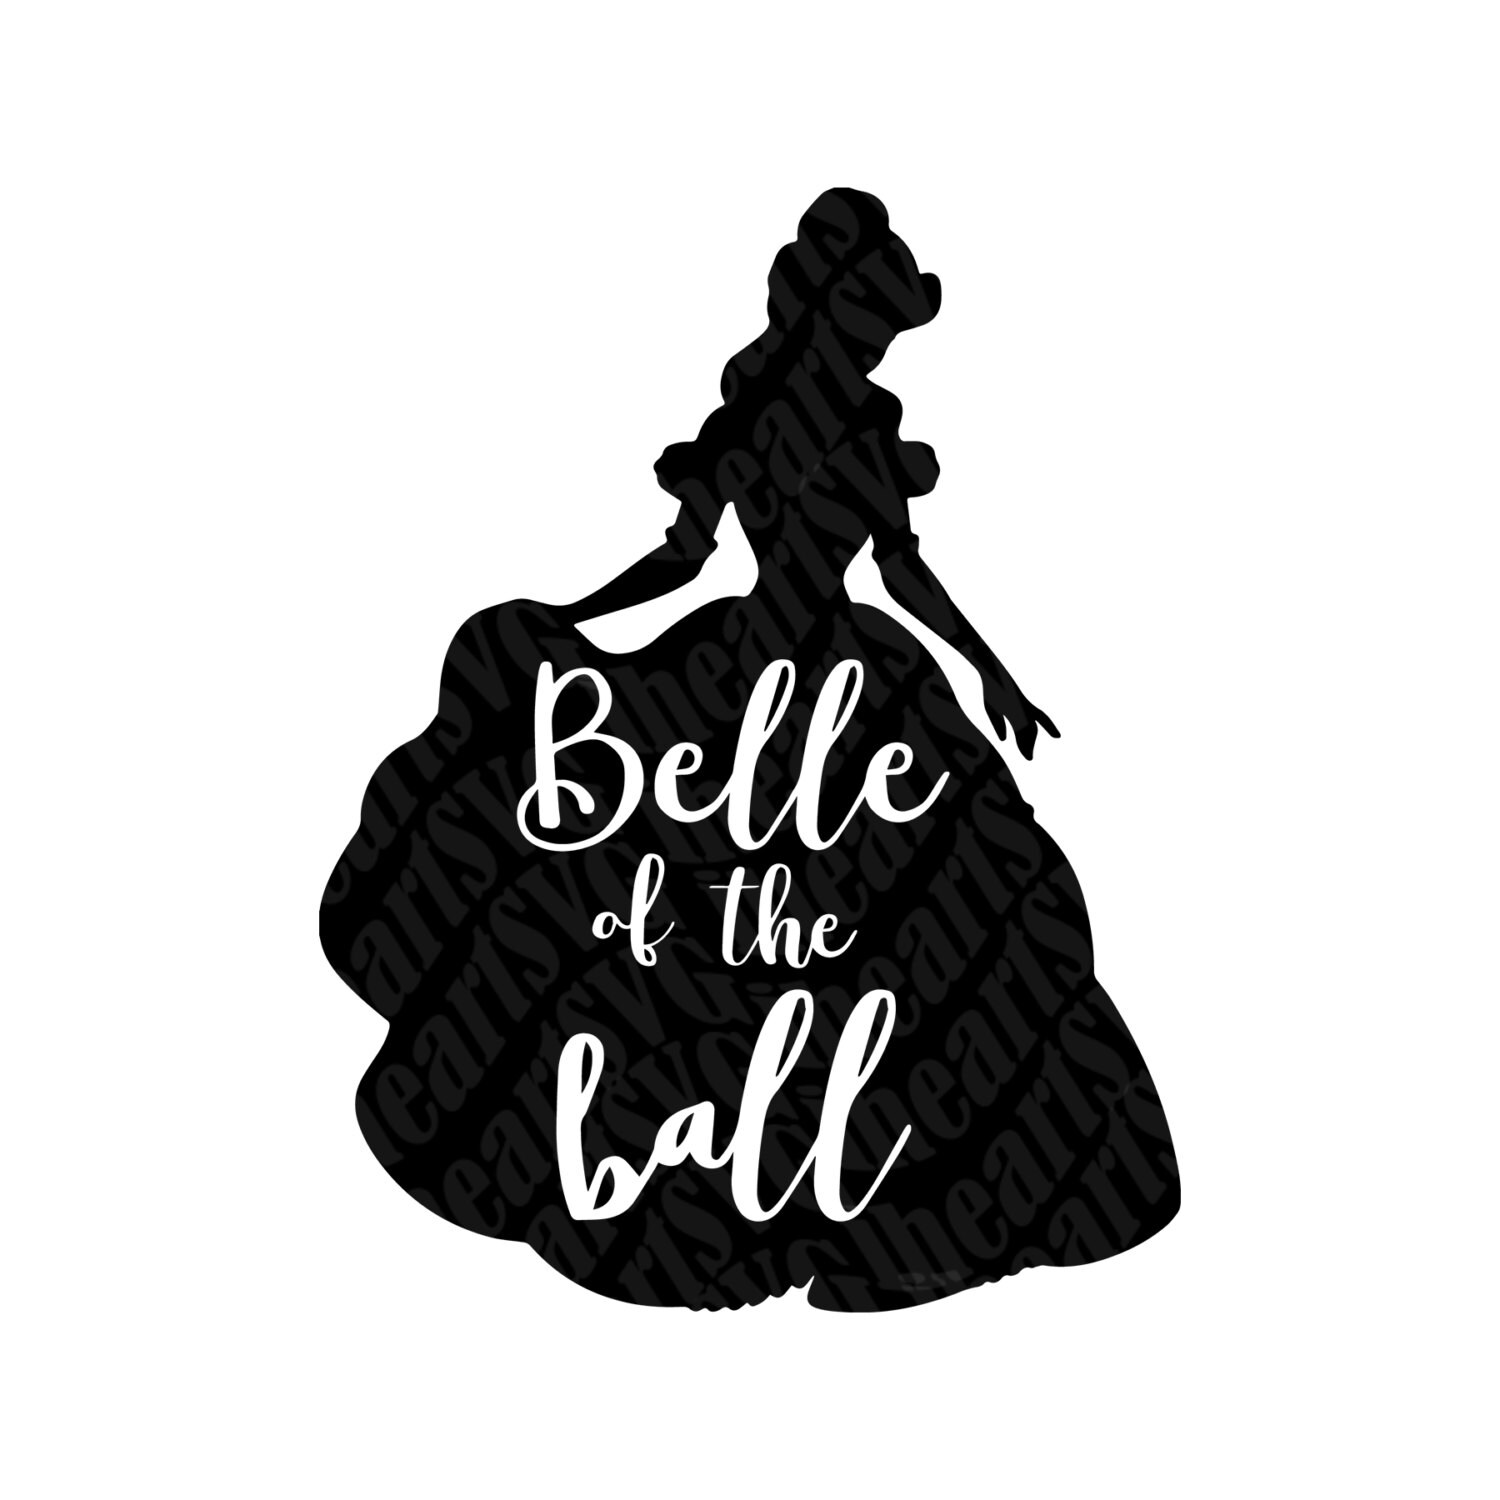 Download Beauty and the Beast Belle of the Ball SVG PNG by IHeartSVG